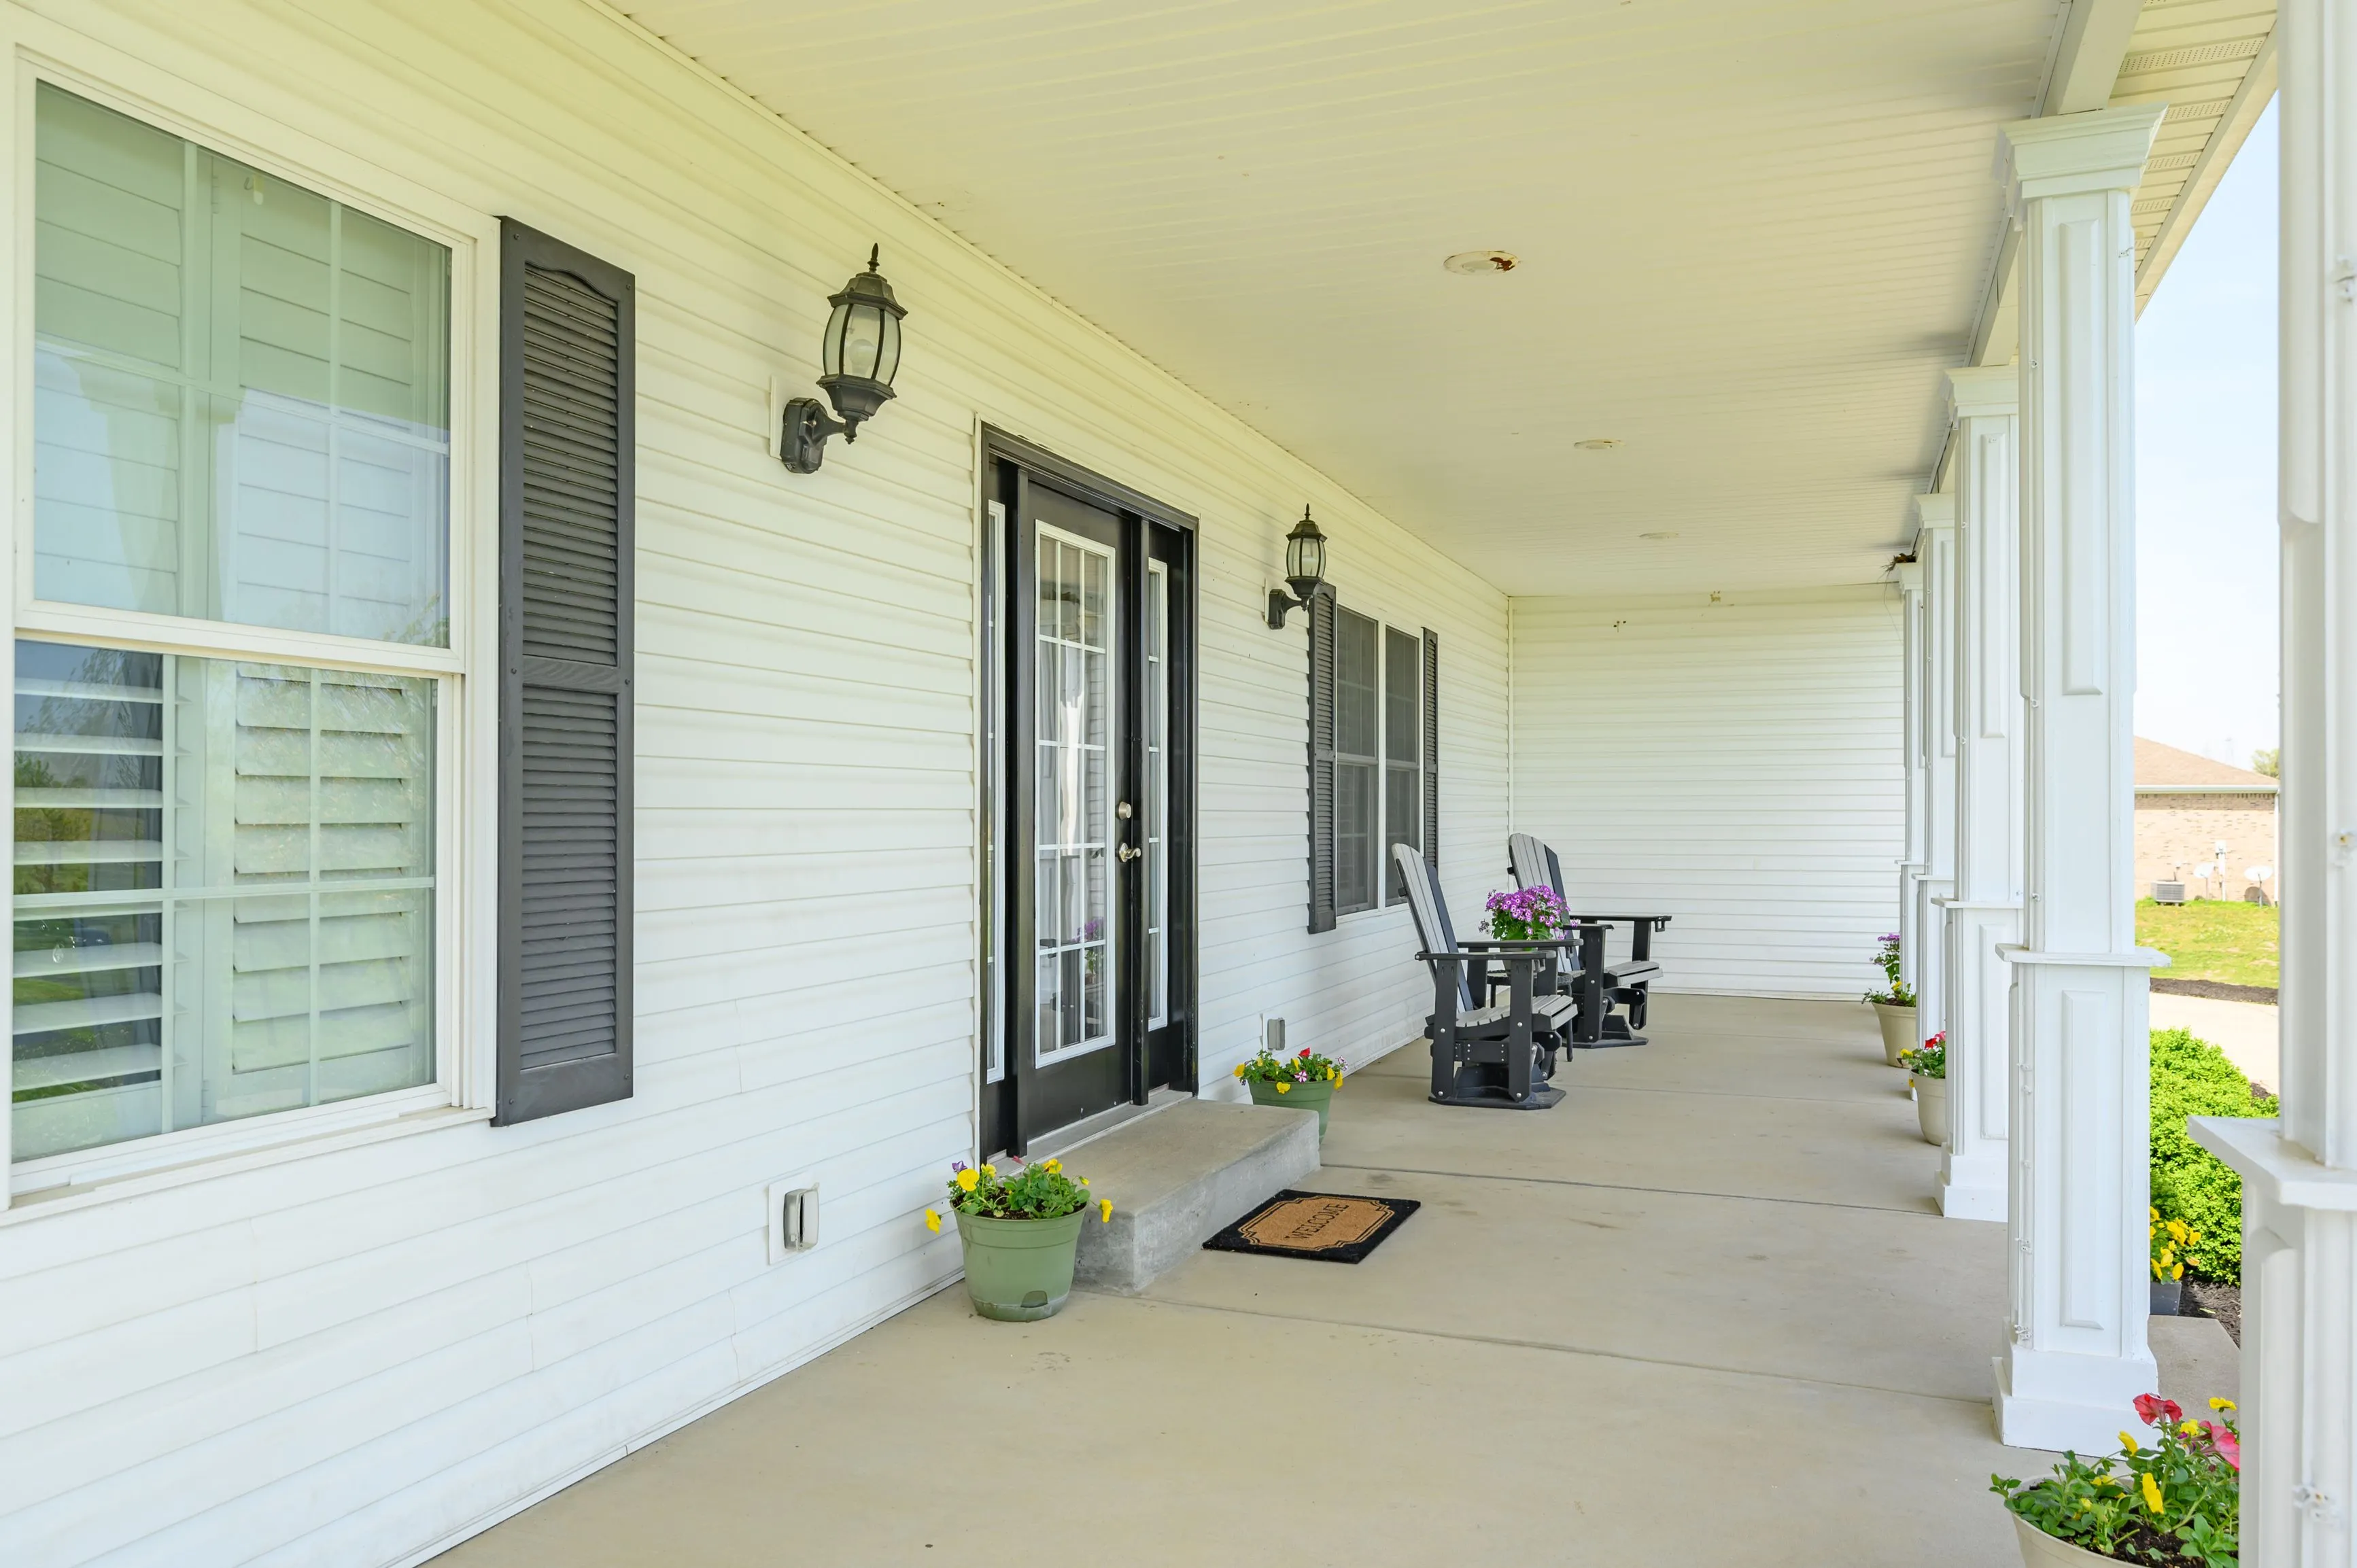 Bright and inviting covered residential porch with chairs, plants, and welcome mat.